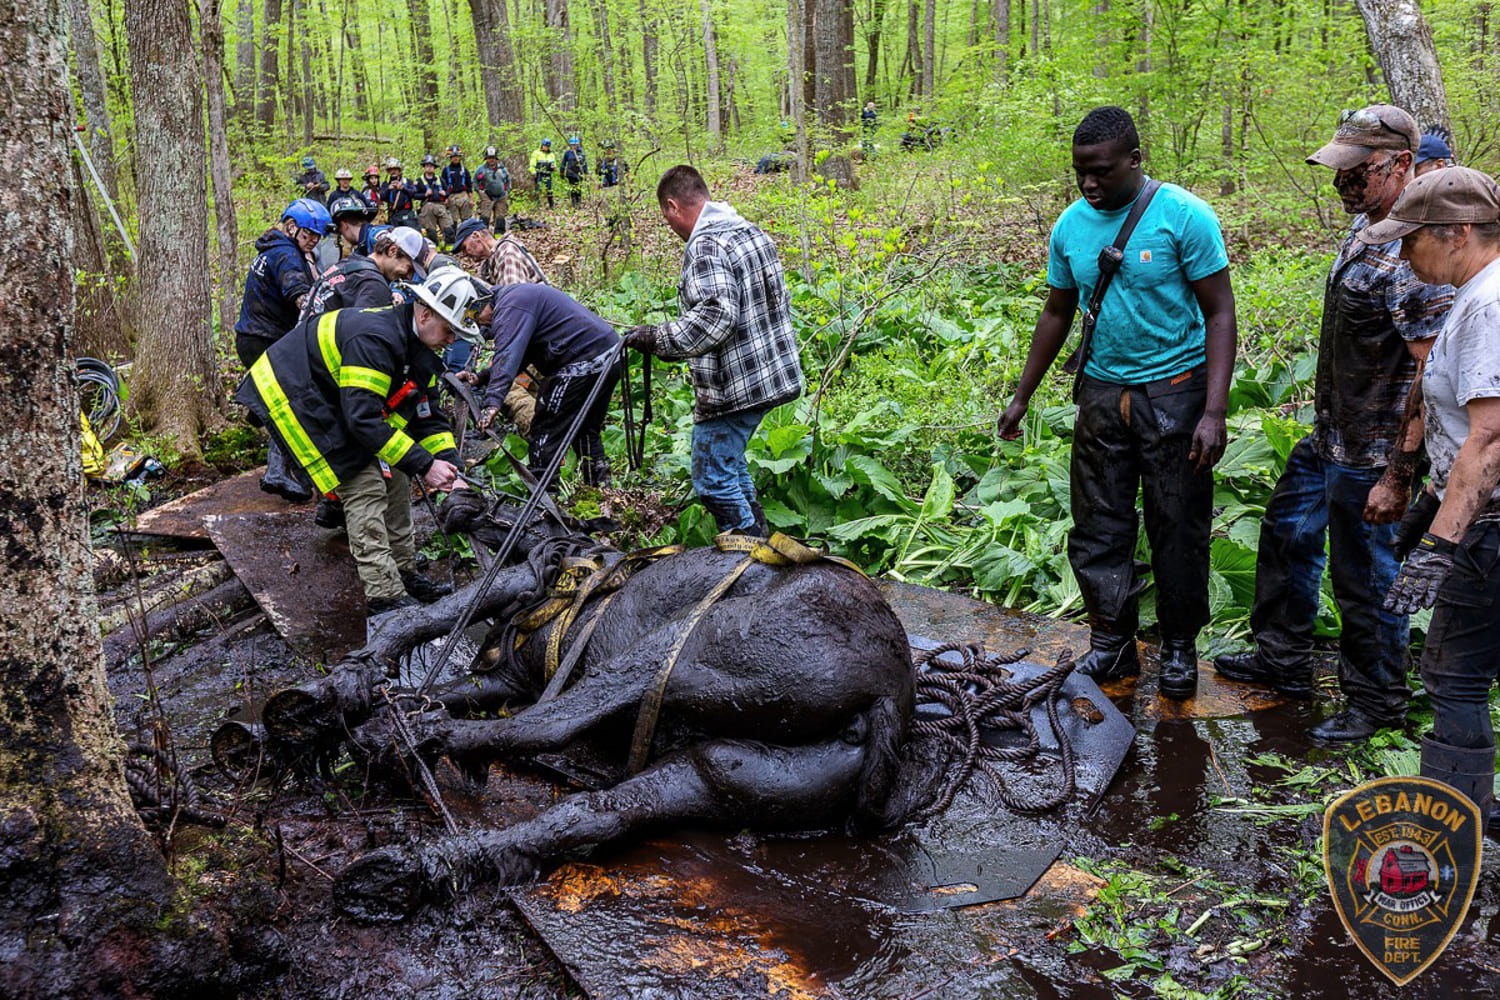 40 people work to free two horses stuck in mud for hours in Connecticut